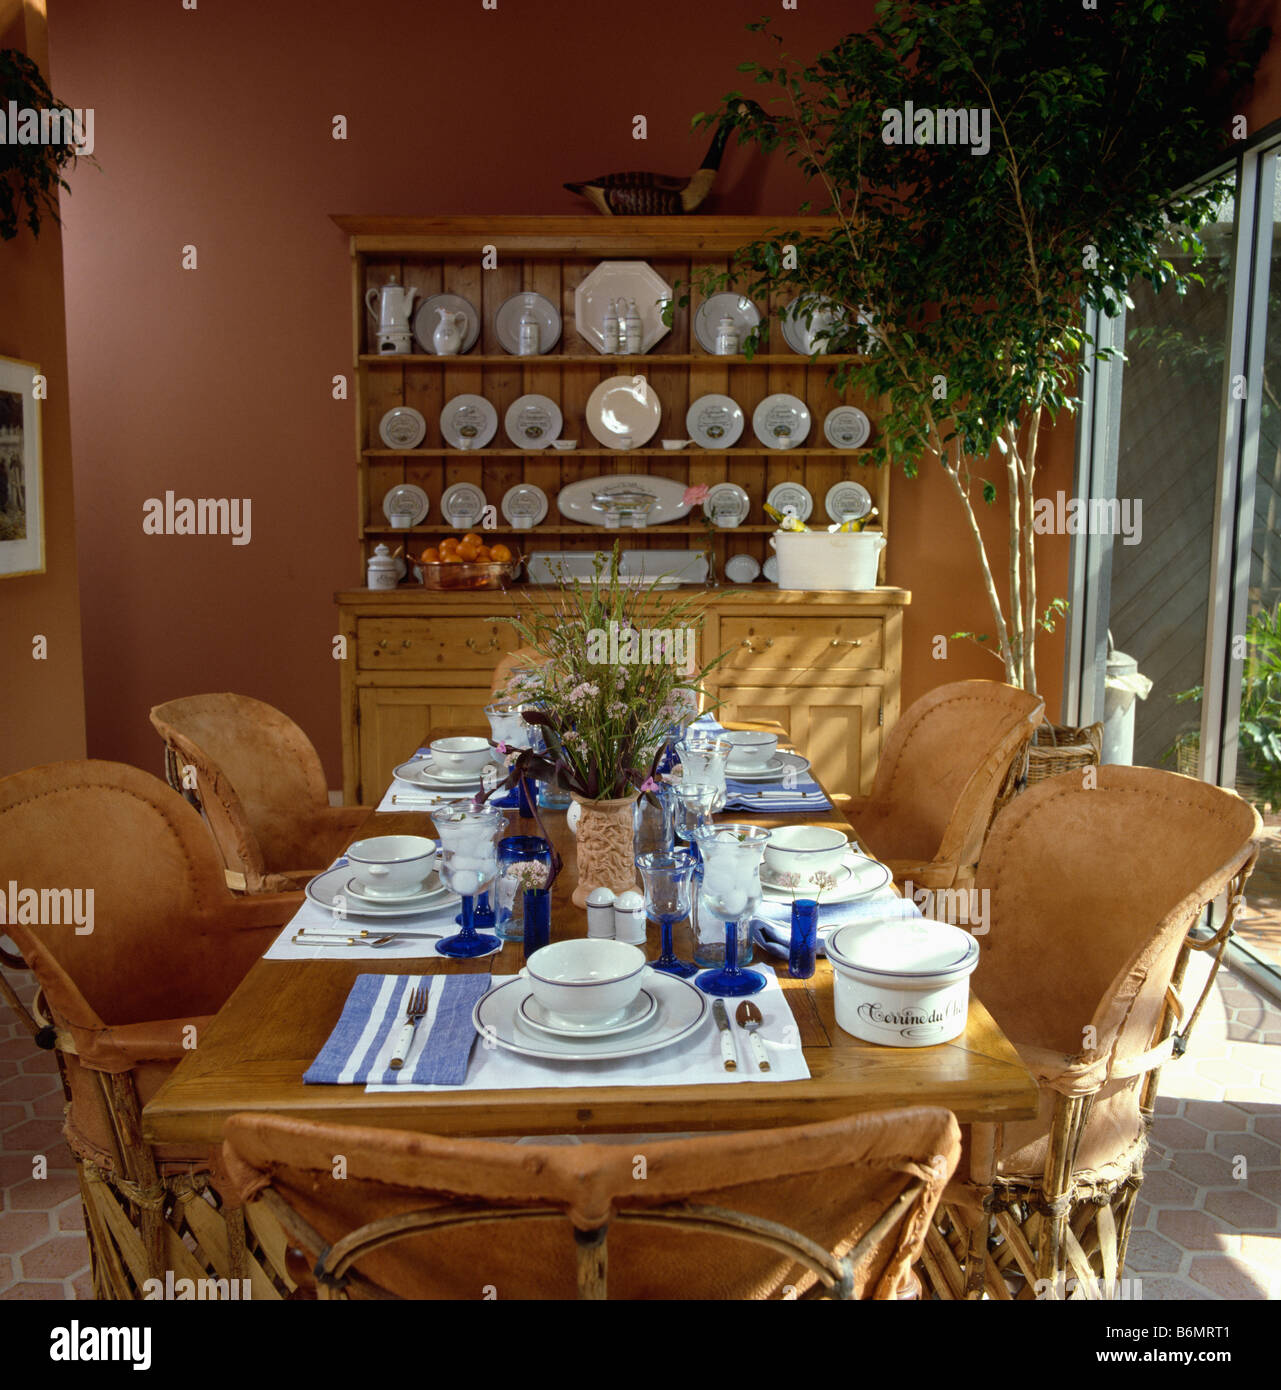 Pale Leather And Cane Mexican Chairs At Table Set For Lunch In Dining Room With Large Dresser At The End Of The Room Stock Photo Alamy